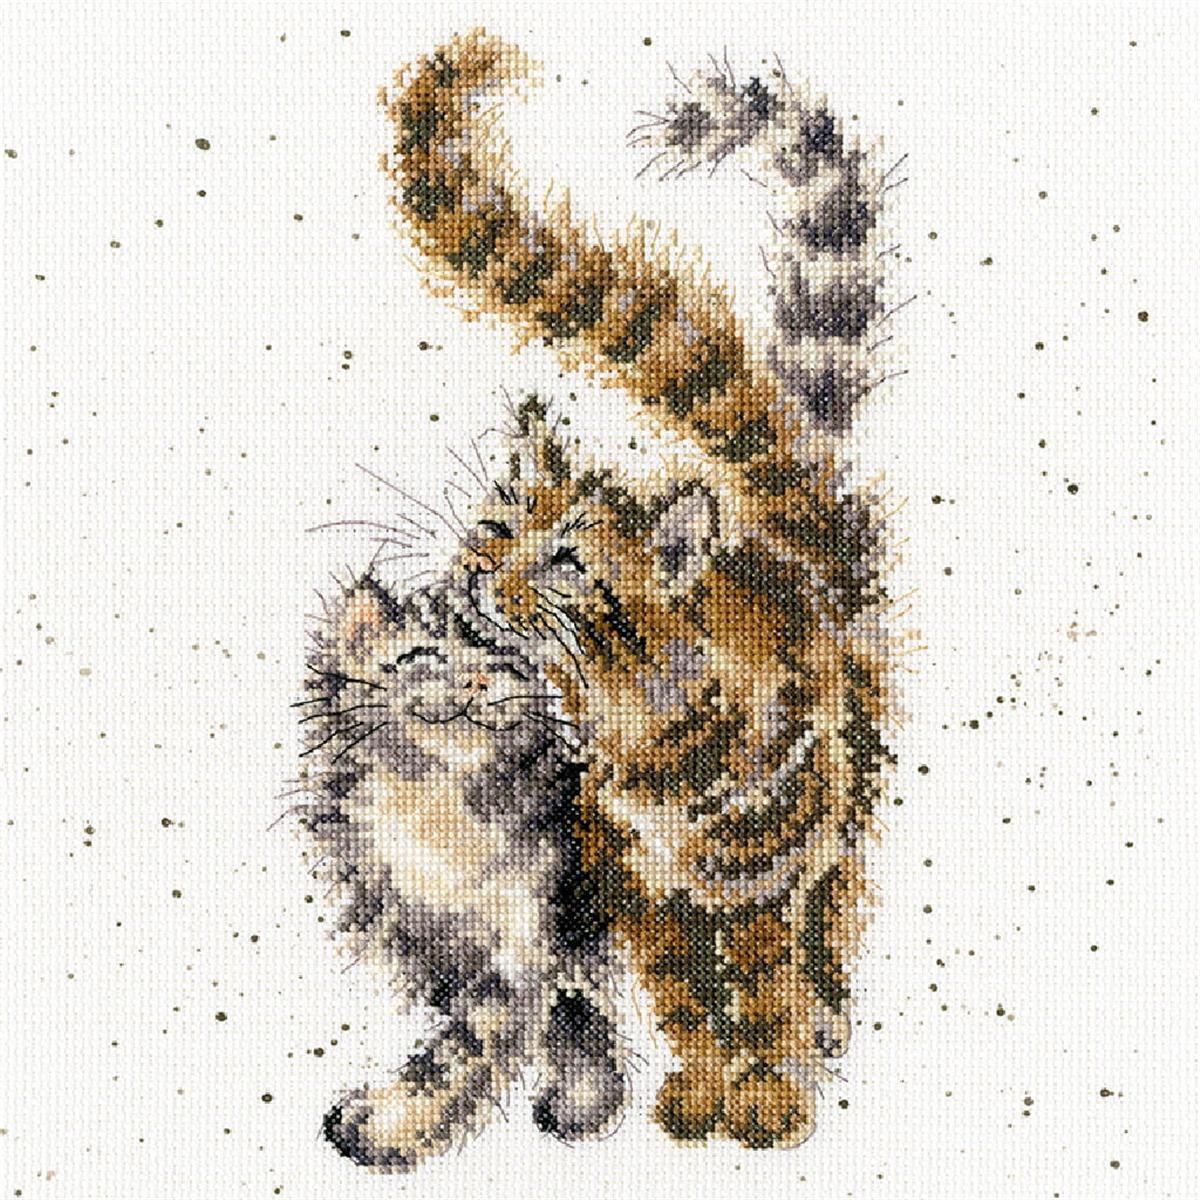 An adorable embroidery packing pattern from Bothy Threads...